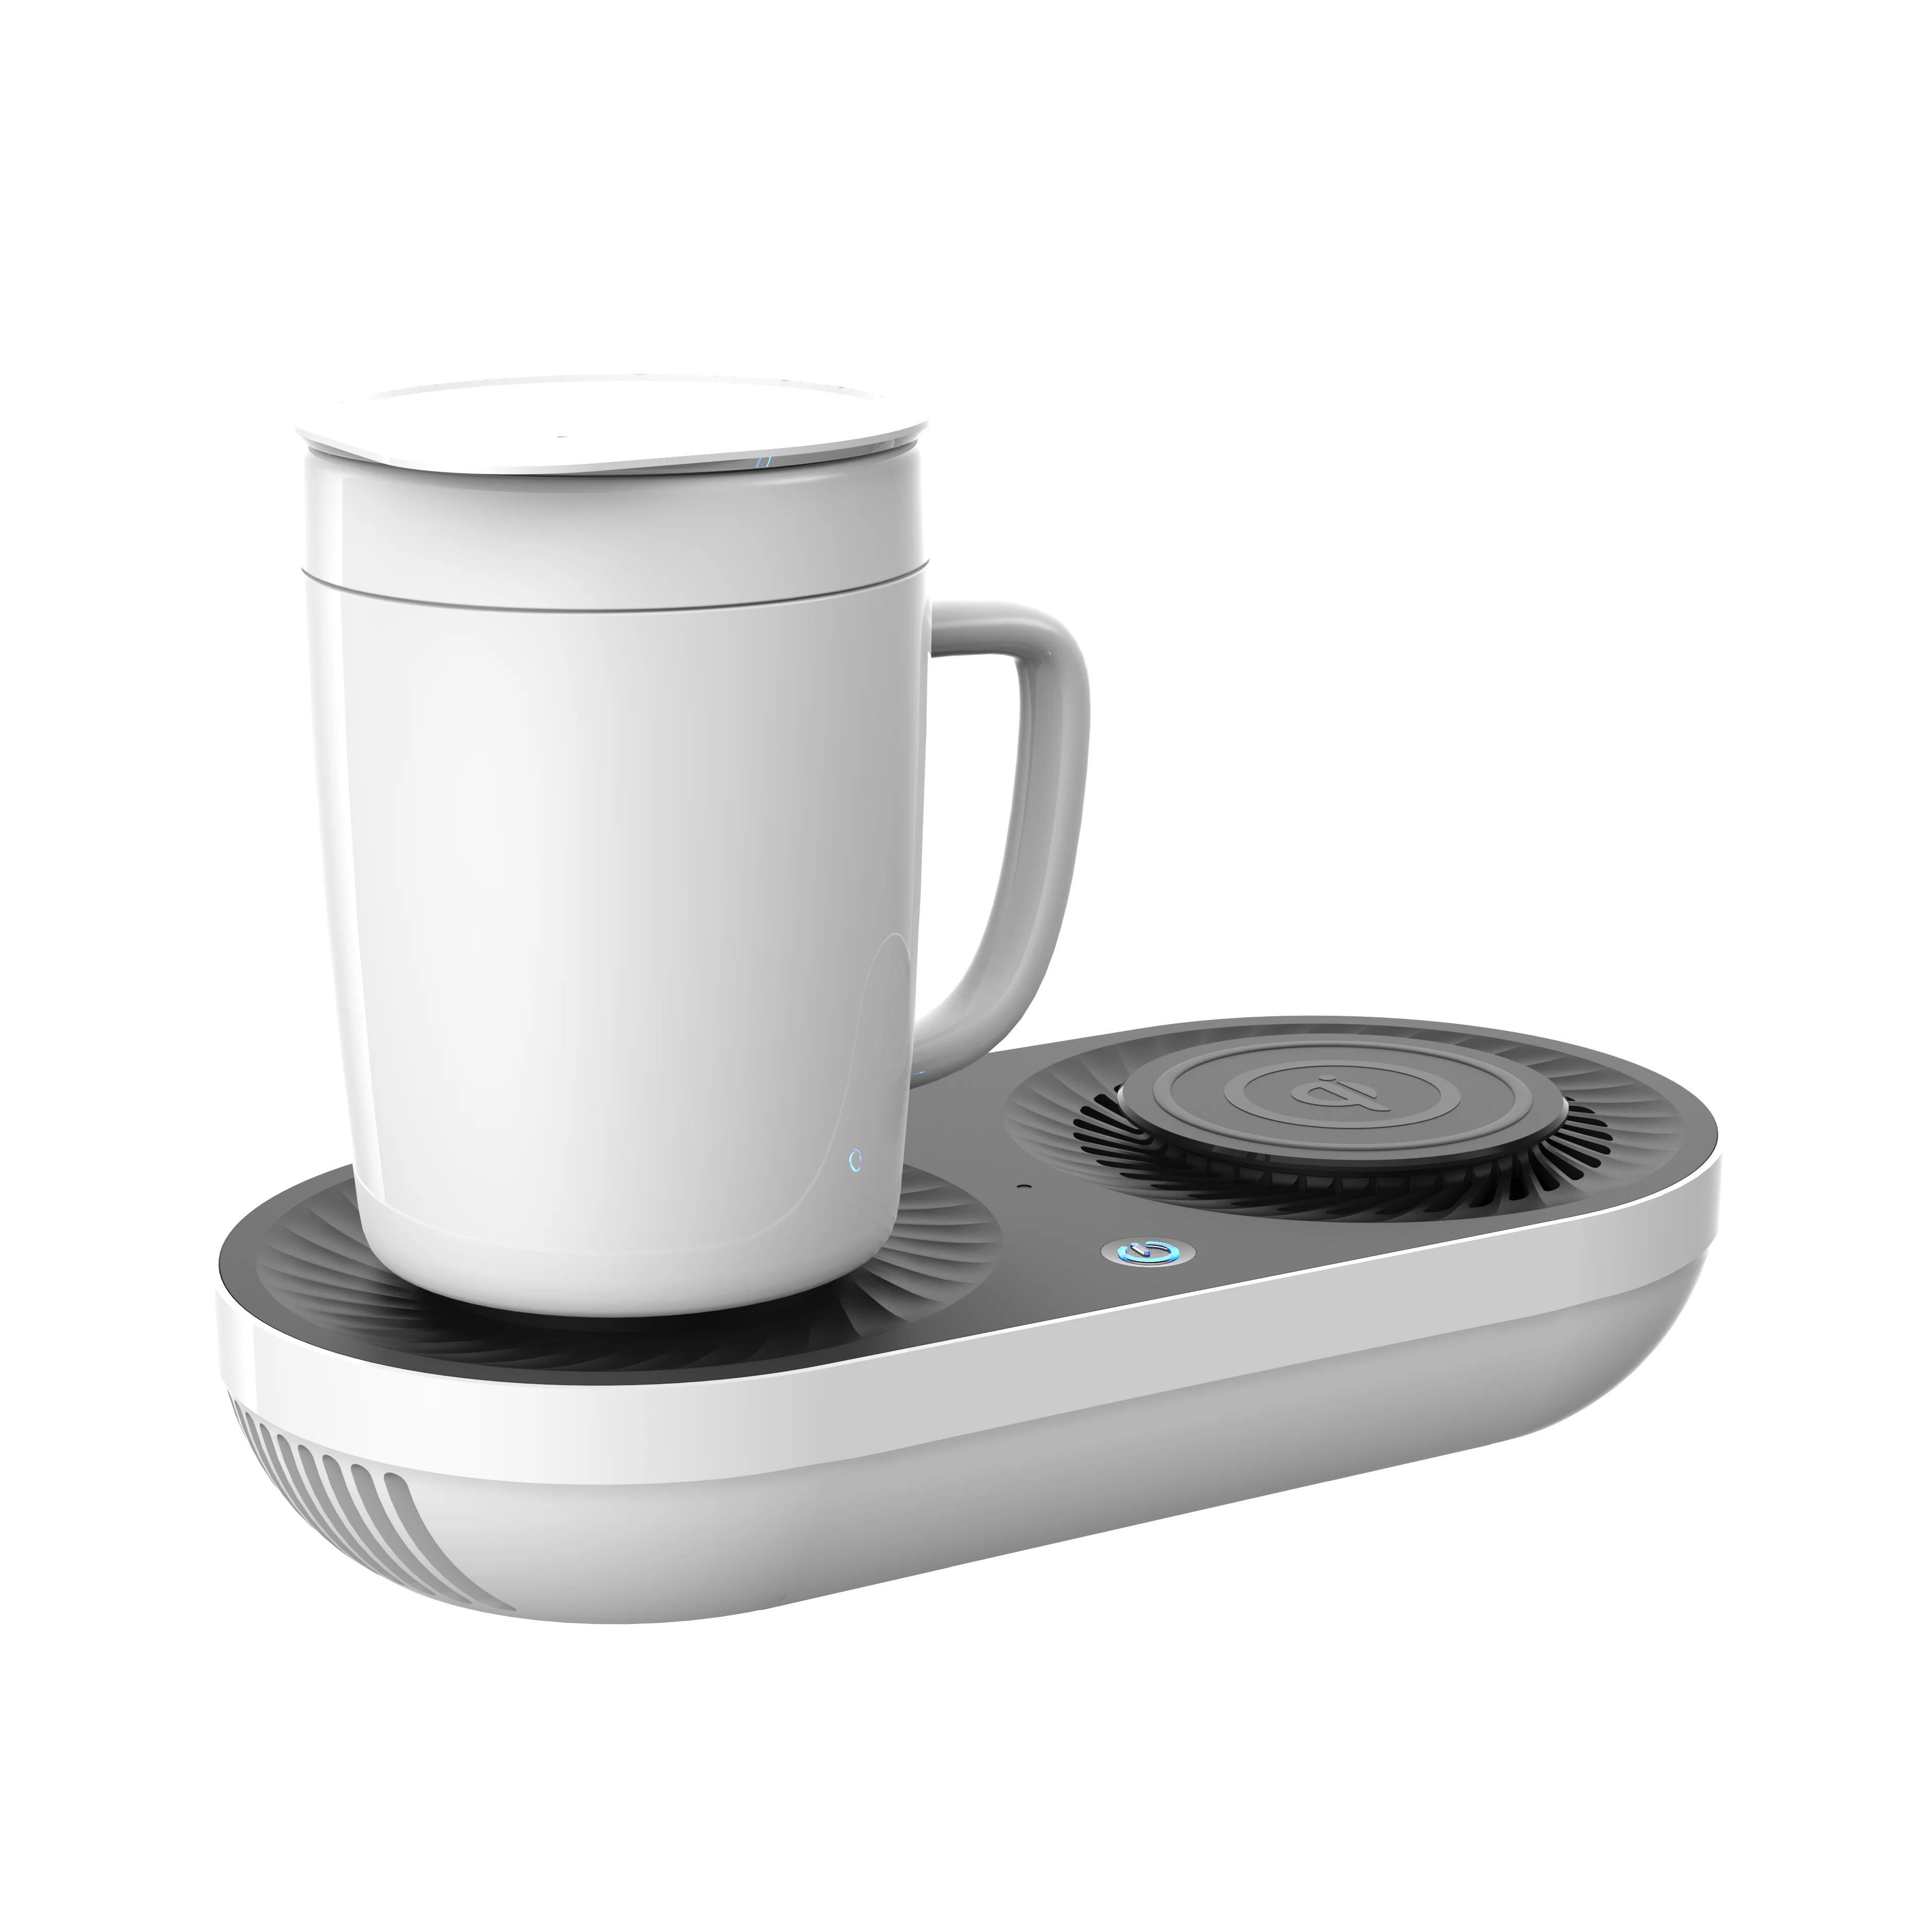 PALTIER Coffee Mug Warmer, Drink Cooler with Wireless Charger, Smart Cup  Warming, Beverage Cooling and Phone Charging 3 in 1 for Desk Office Gift